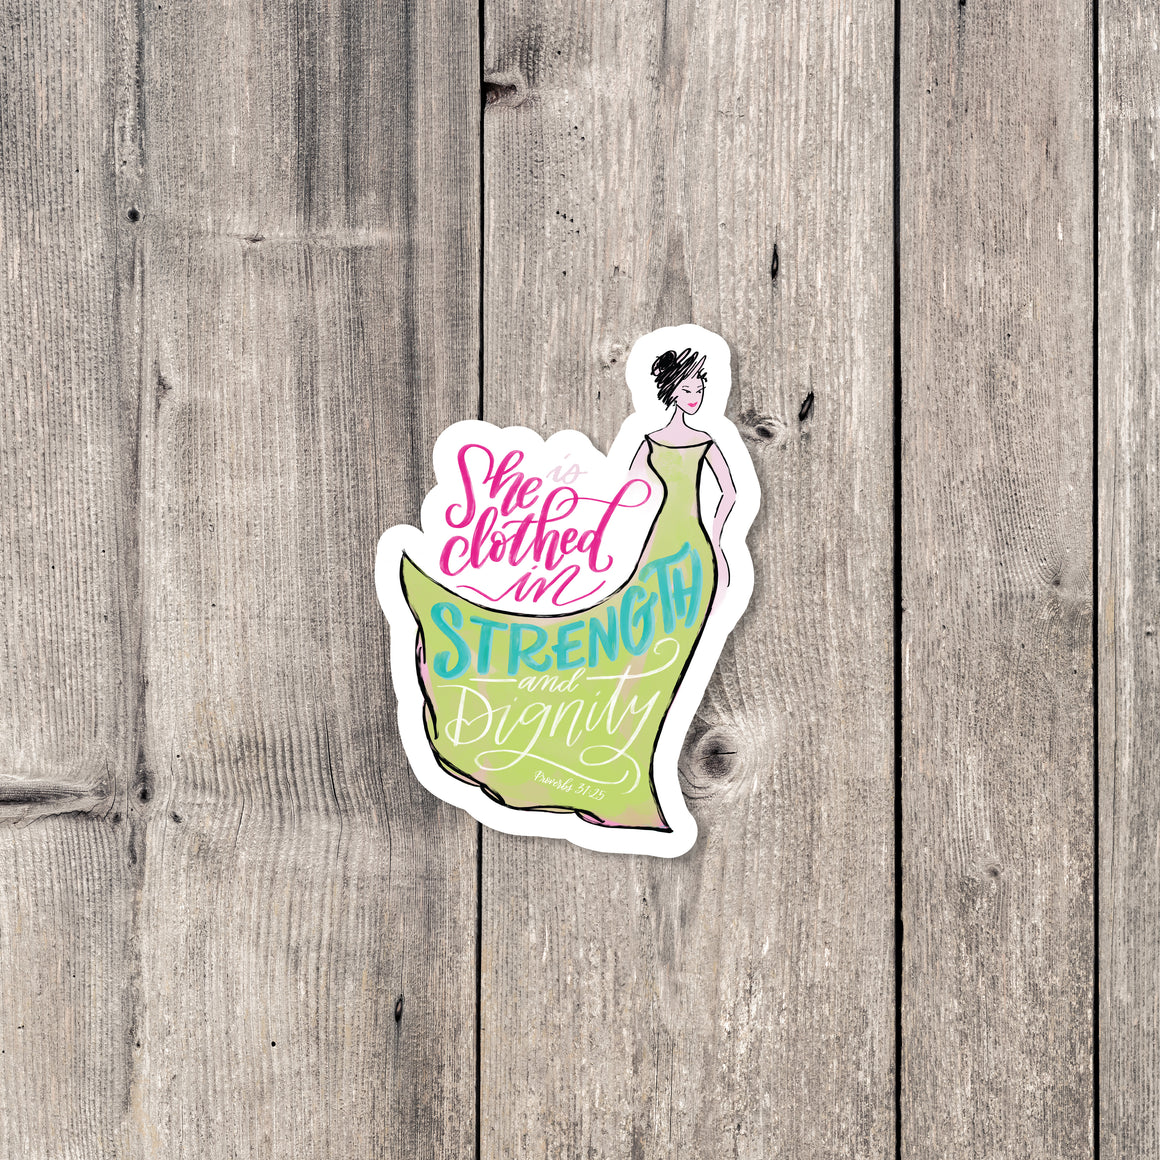 "Clothed in Strength" sticker